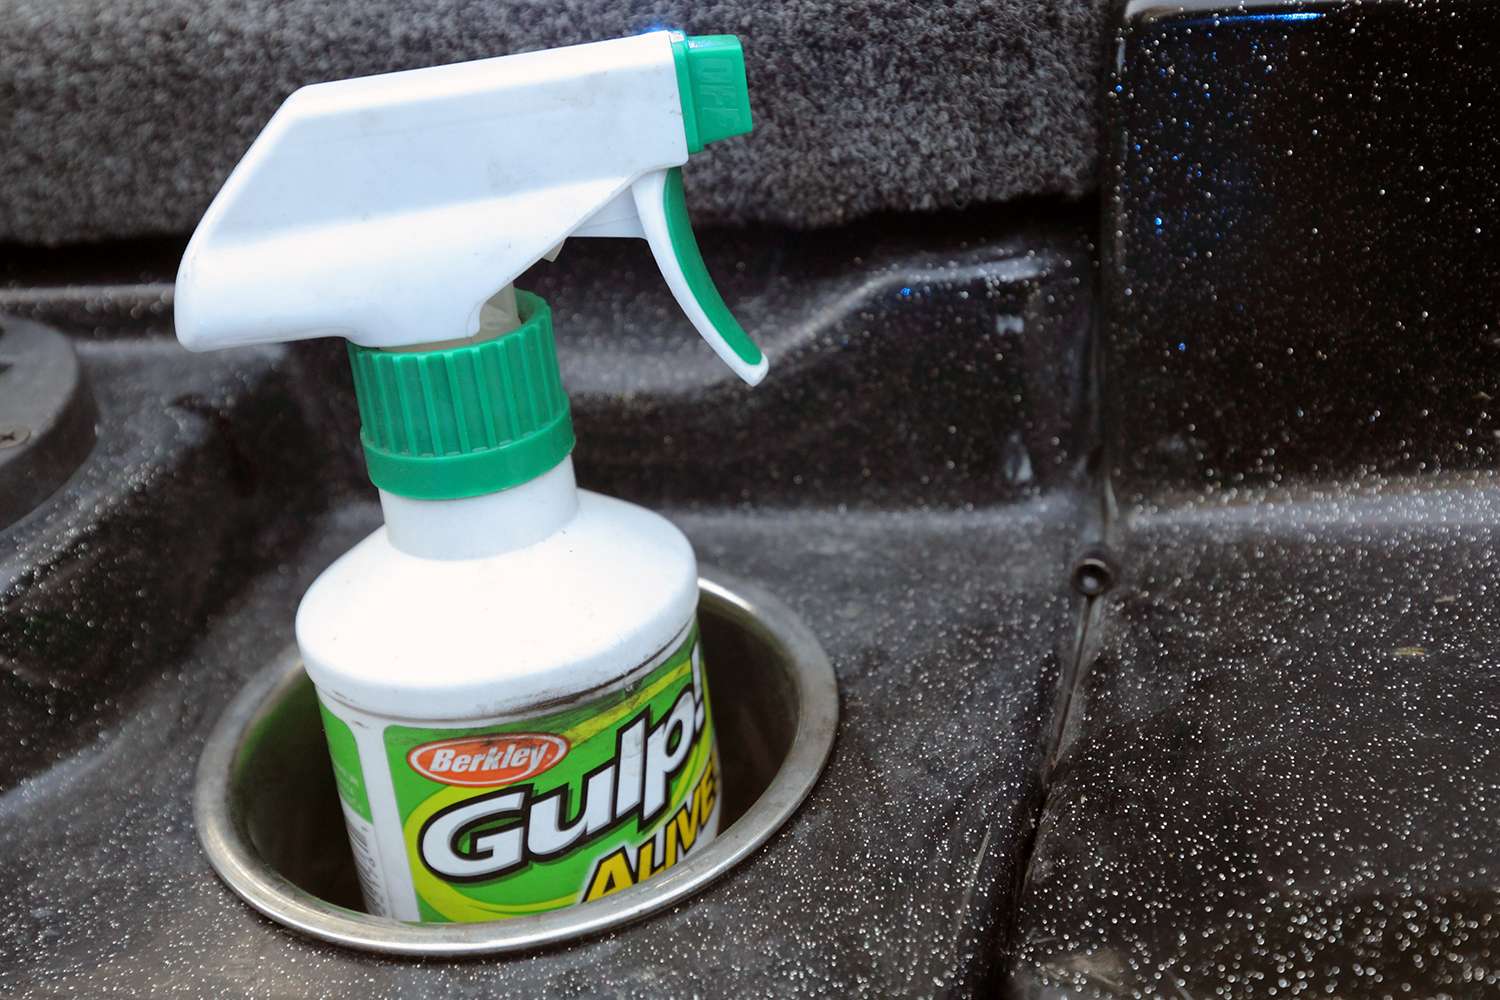 A spray bottle of Gulp! was handy as Bertrand's boat was prepped to head out on a smallmouth fishery. Bertrand said he will spray Gulp! on any soft baits he uses.